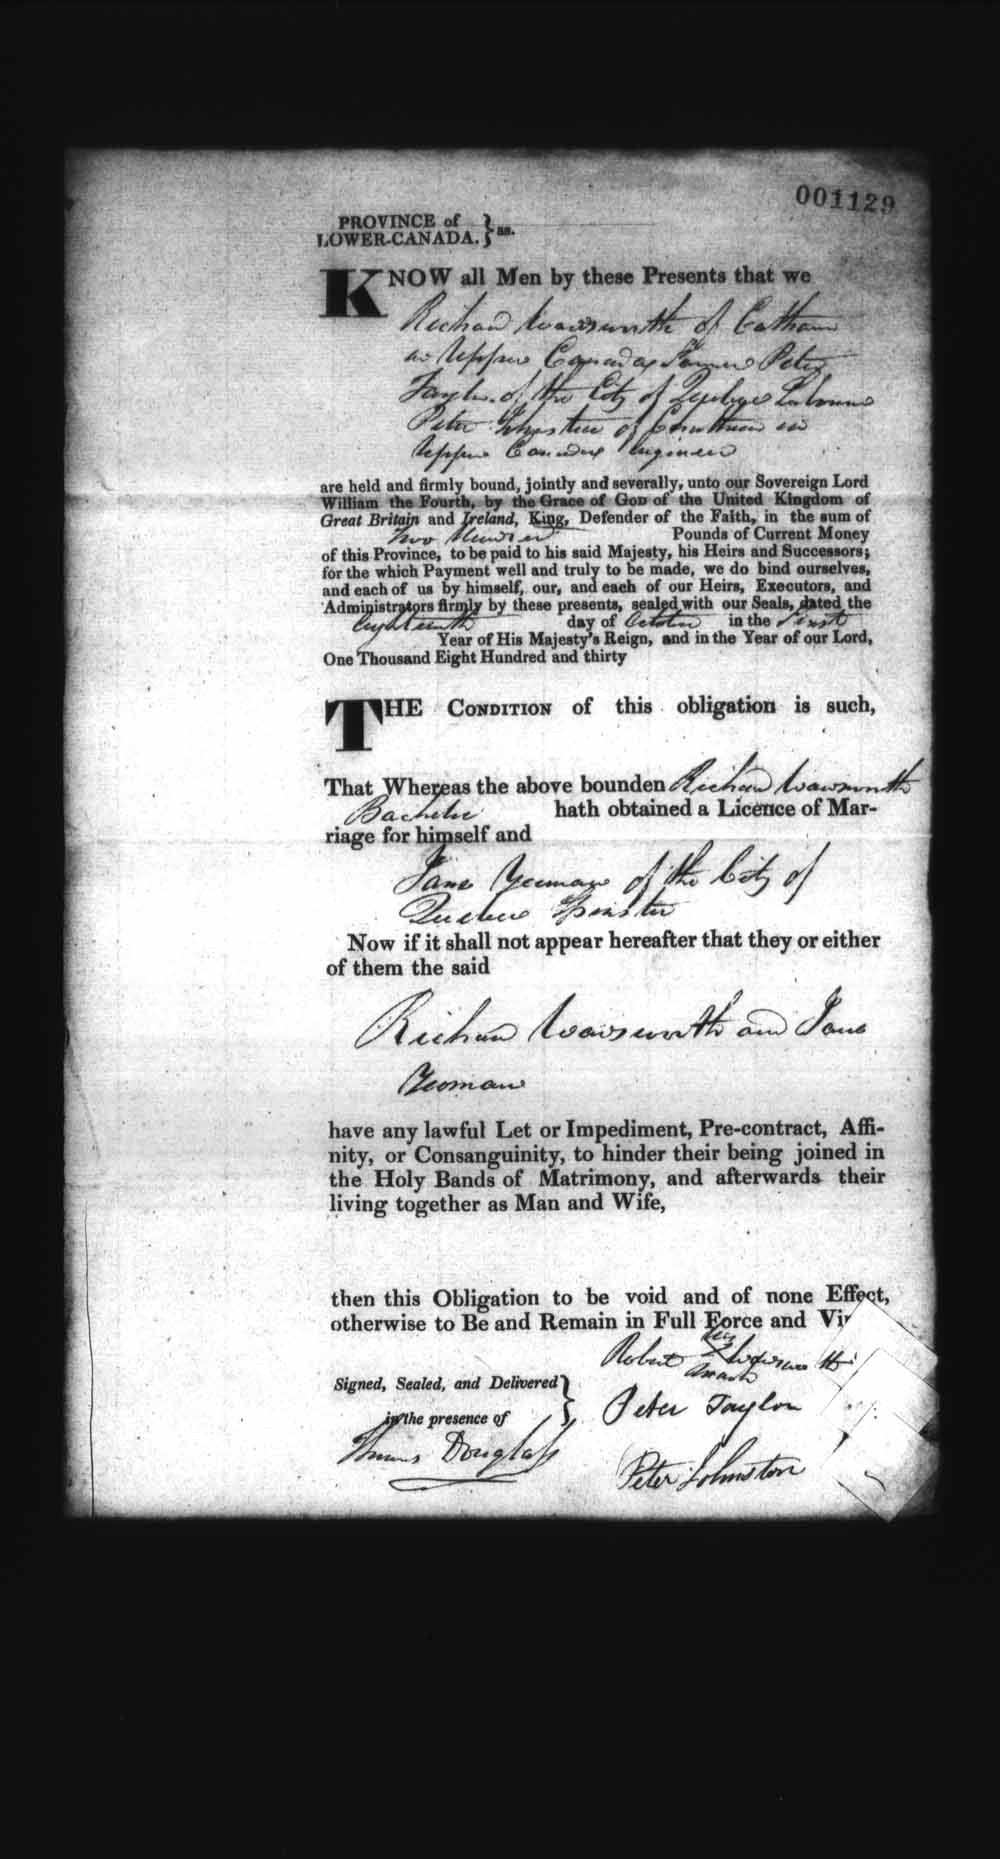 Digitized page of Upper and Lower Canada Marriage Bonds (1779-1865) for Image No.: e008237271